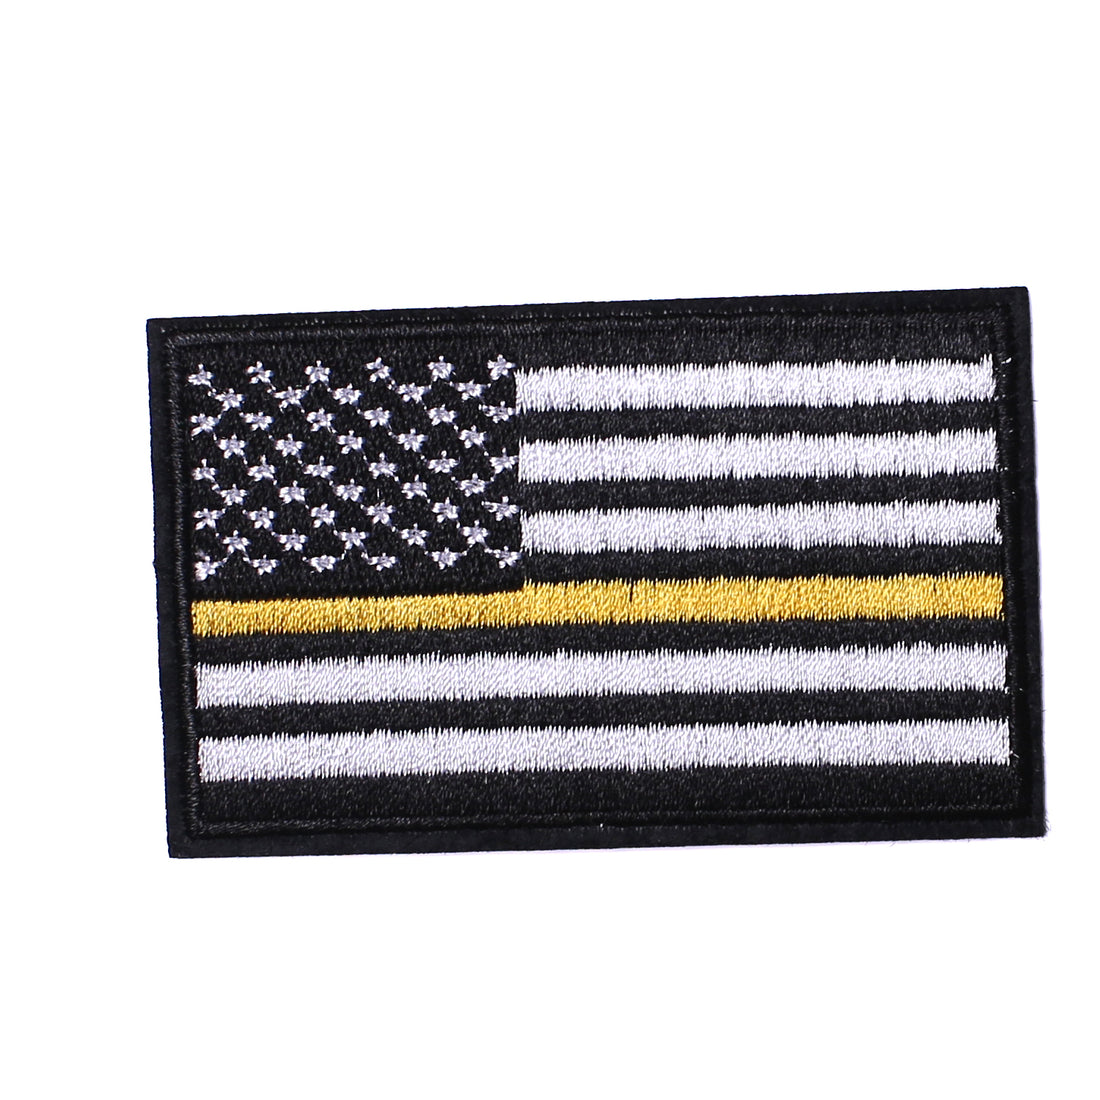 4 Pack American US Flag Patch, Embroidered Sew on Iron on Patches, 4PCS Black-yellow Thin